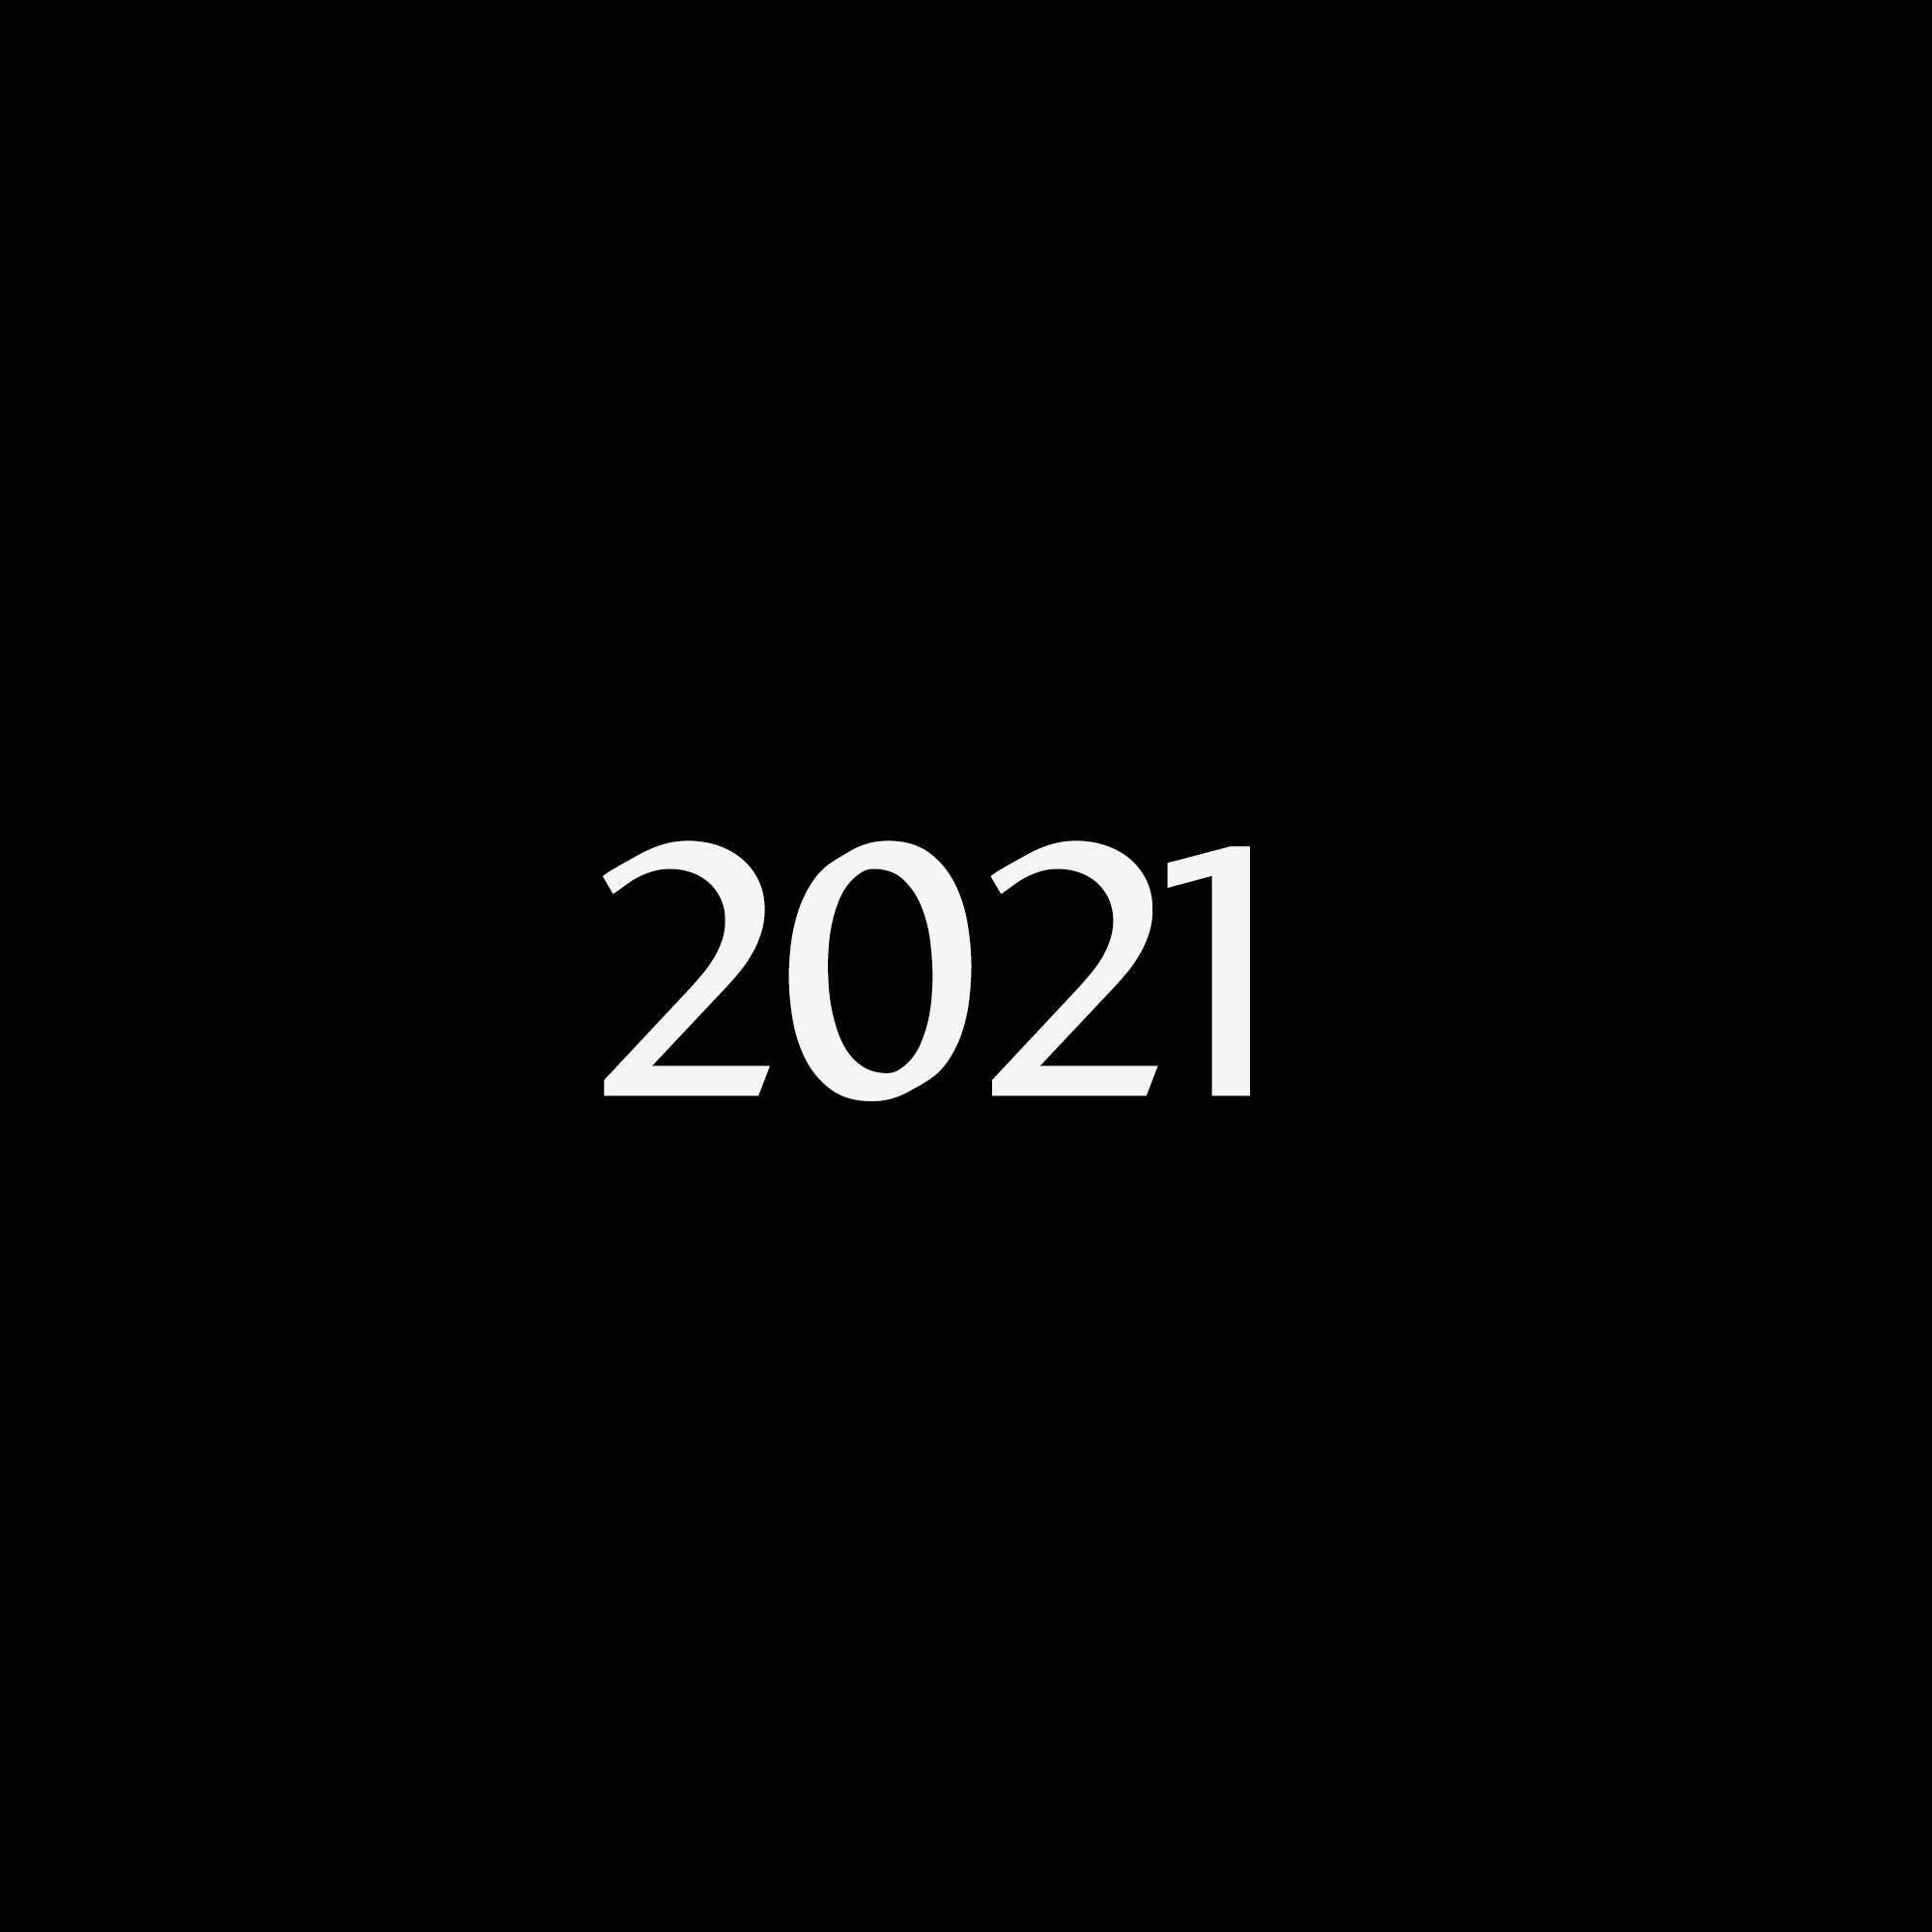 The number 2021